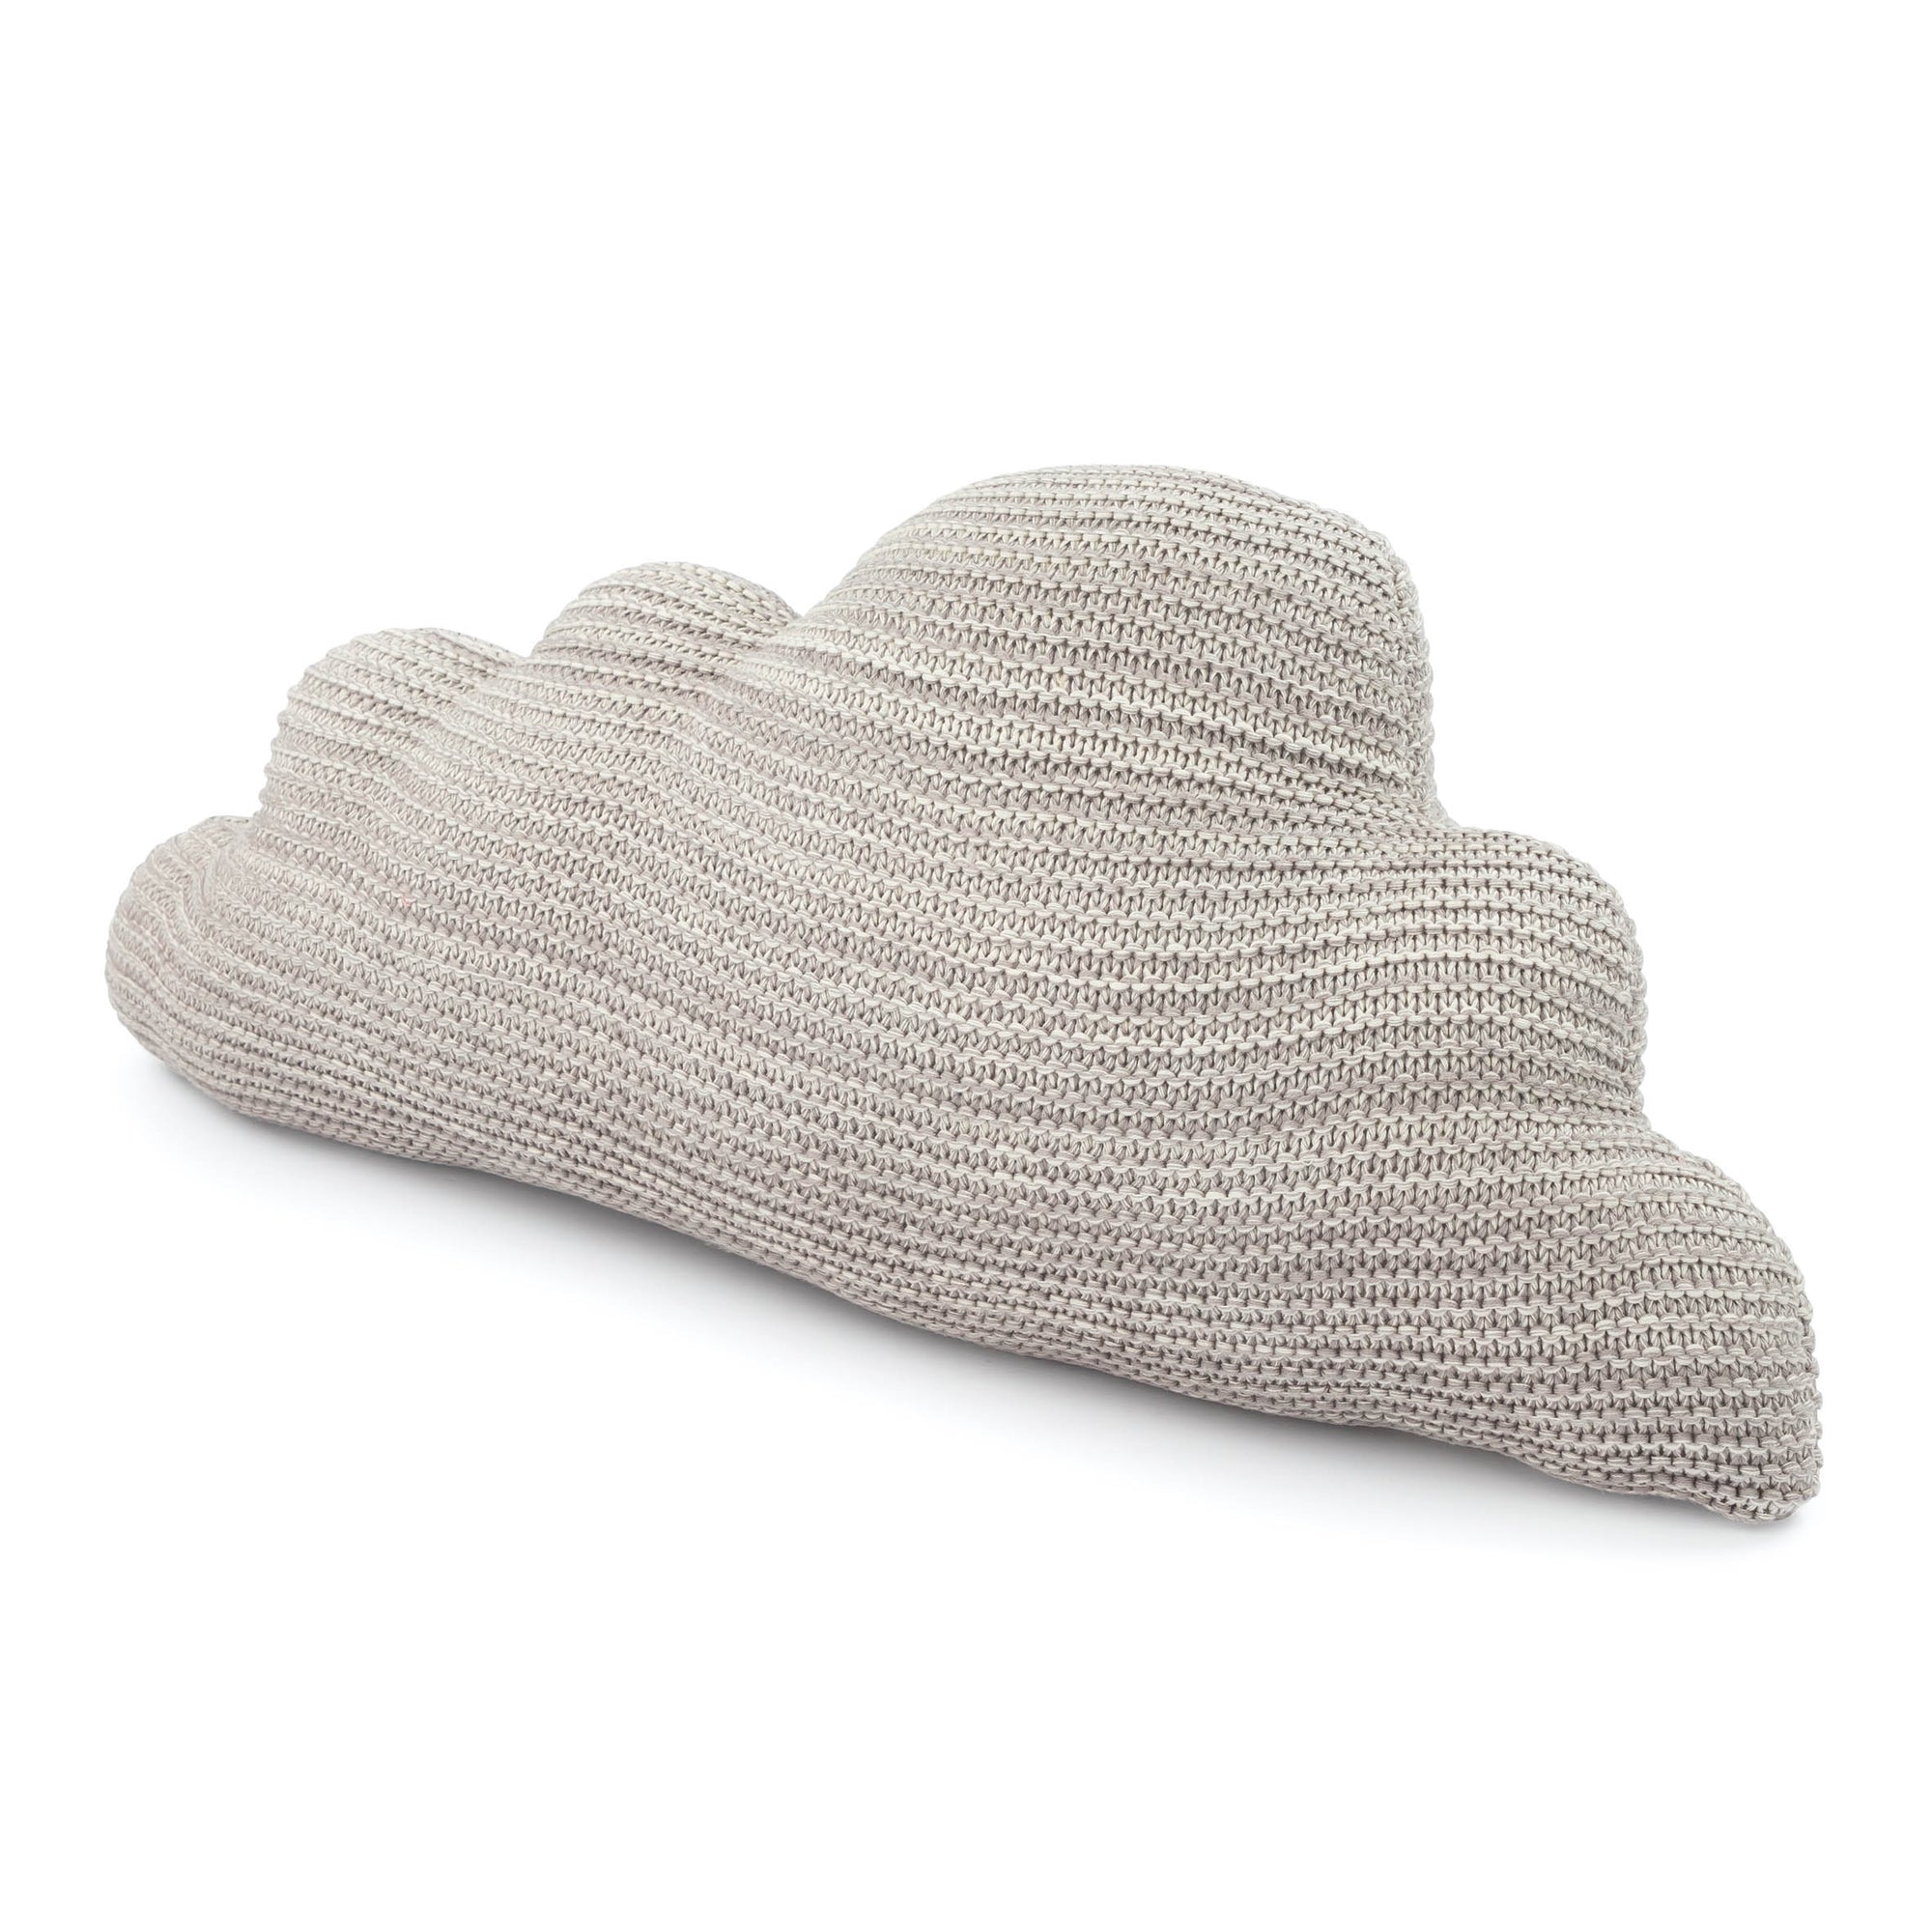 Saturday Park Gray Knitted Cloud Pillow